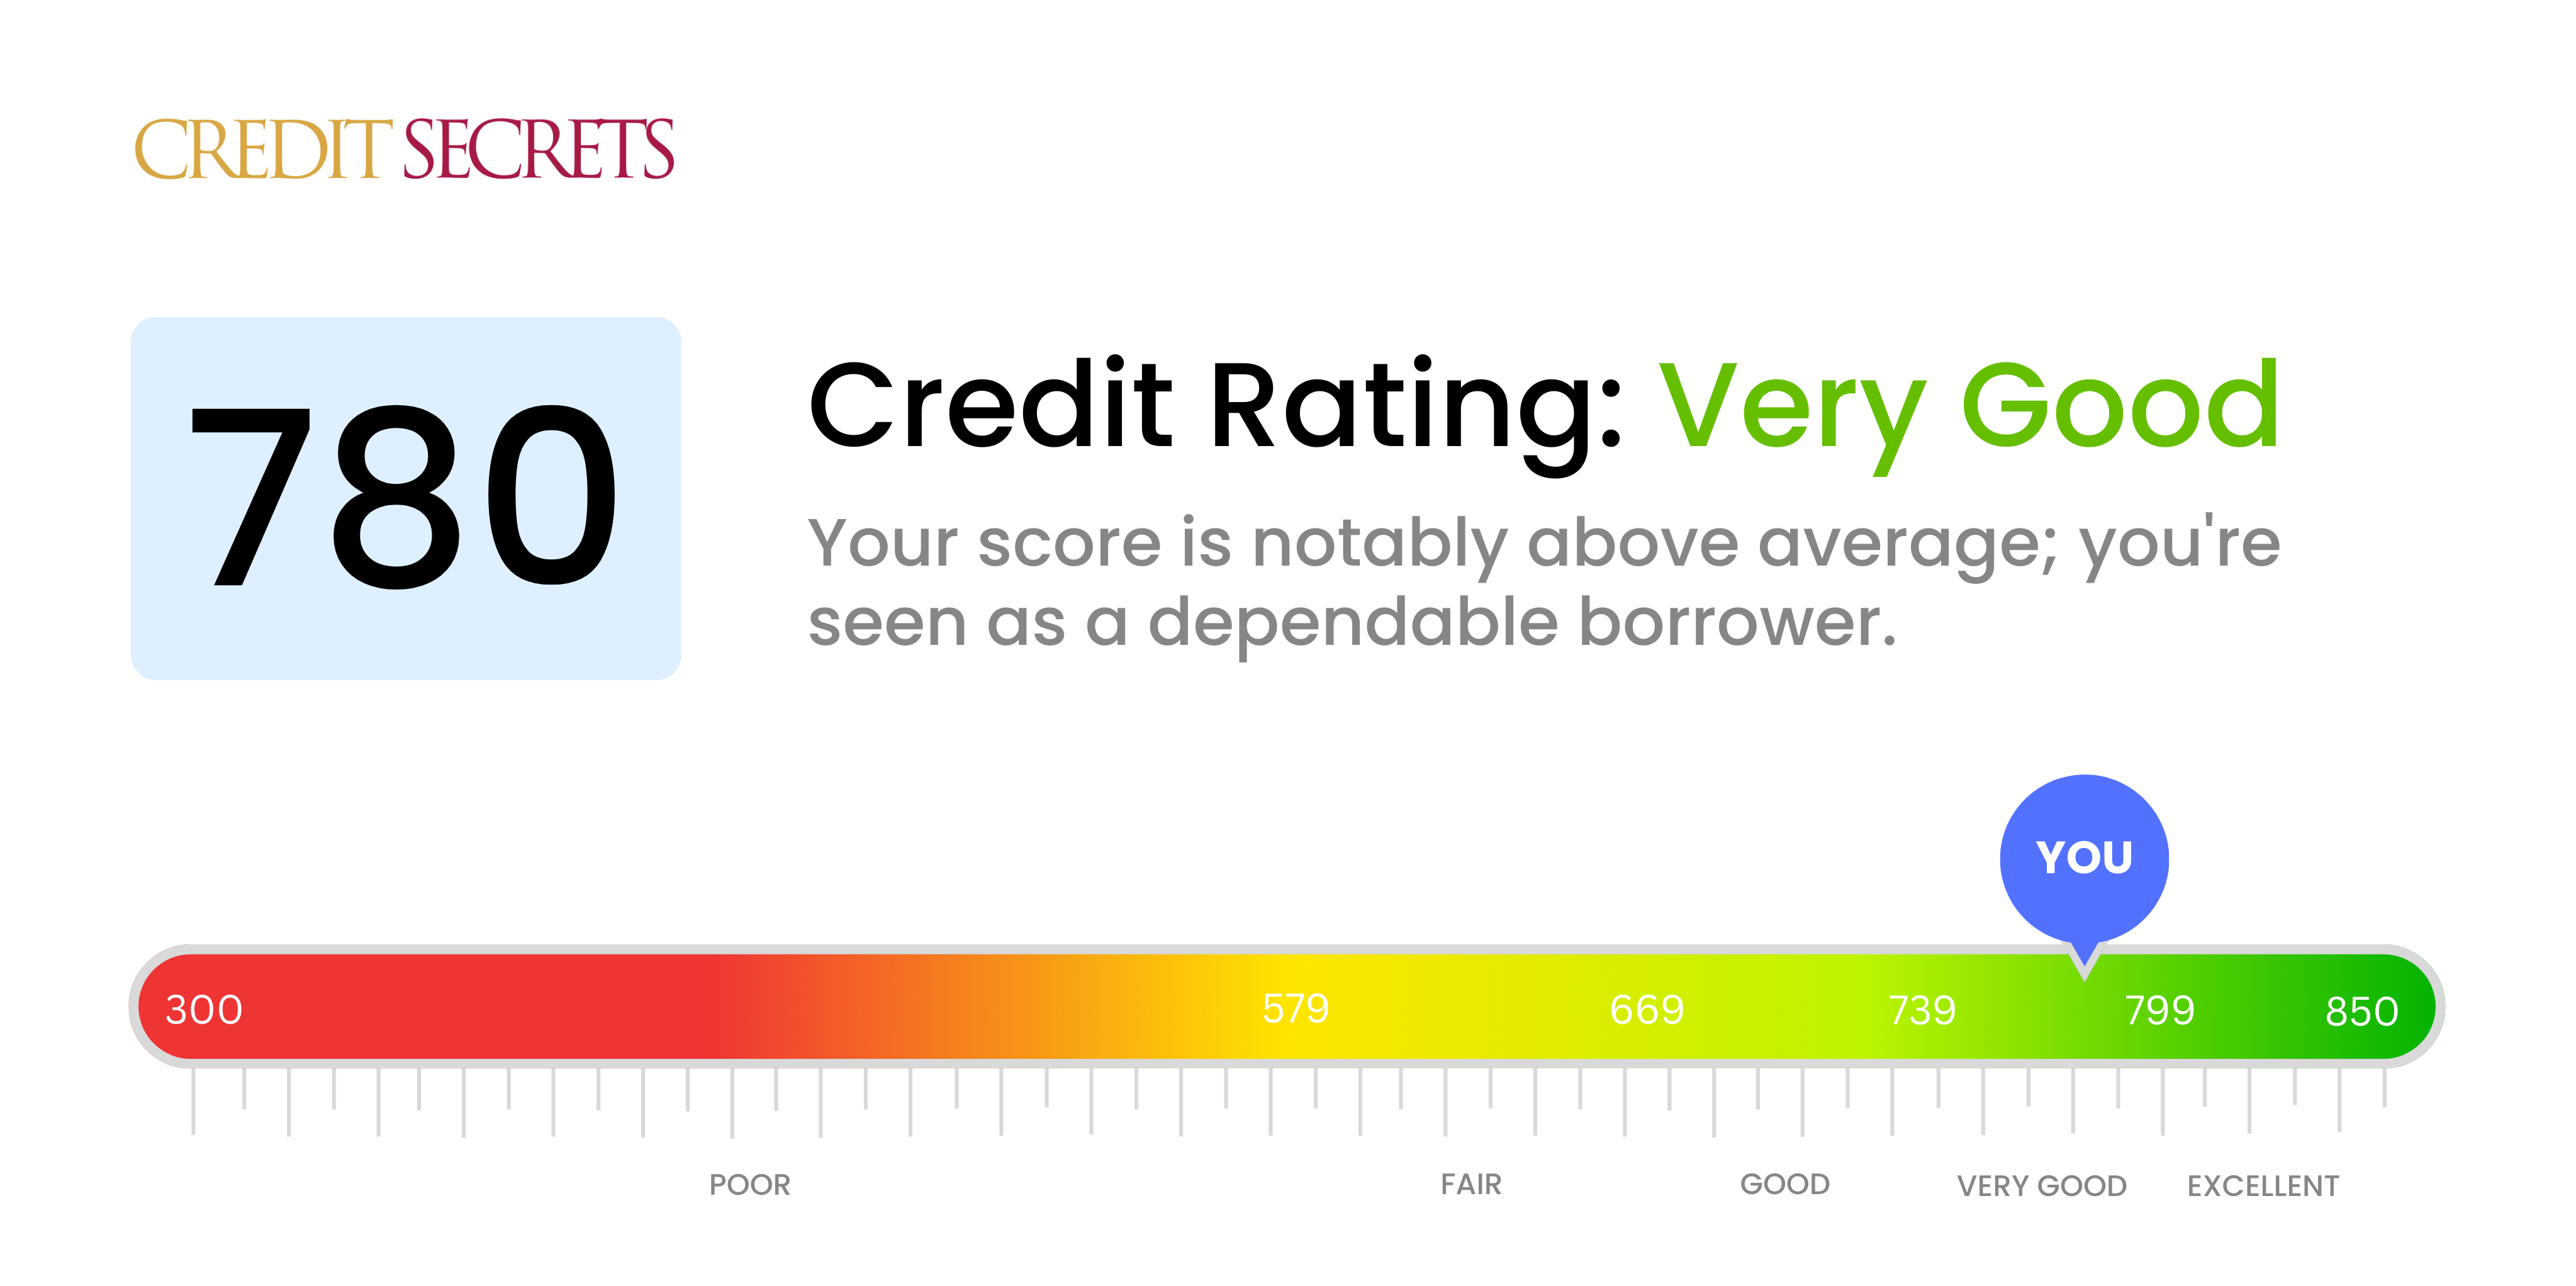 Is 780 a good credit score?